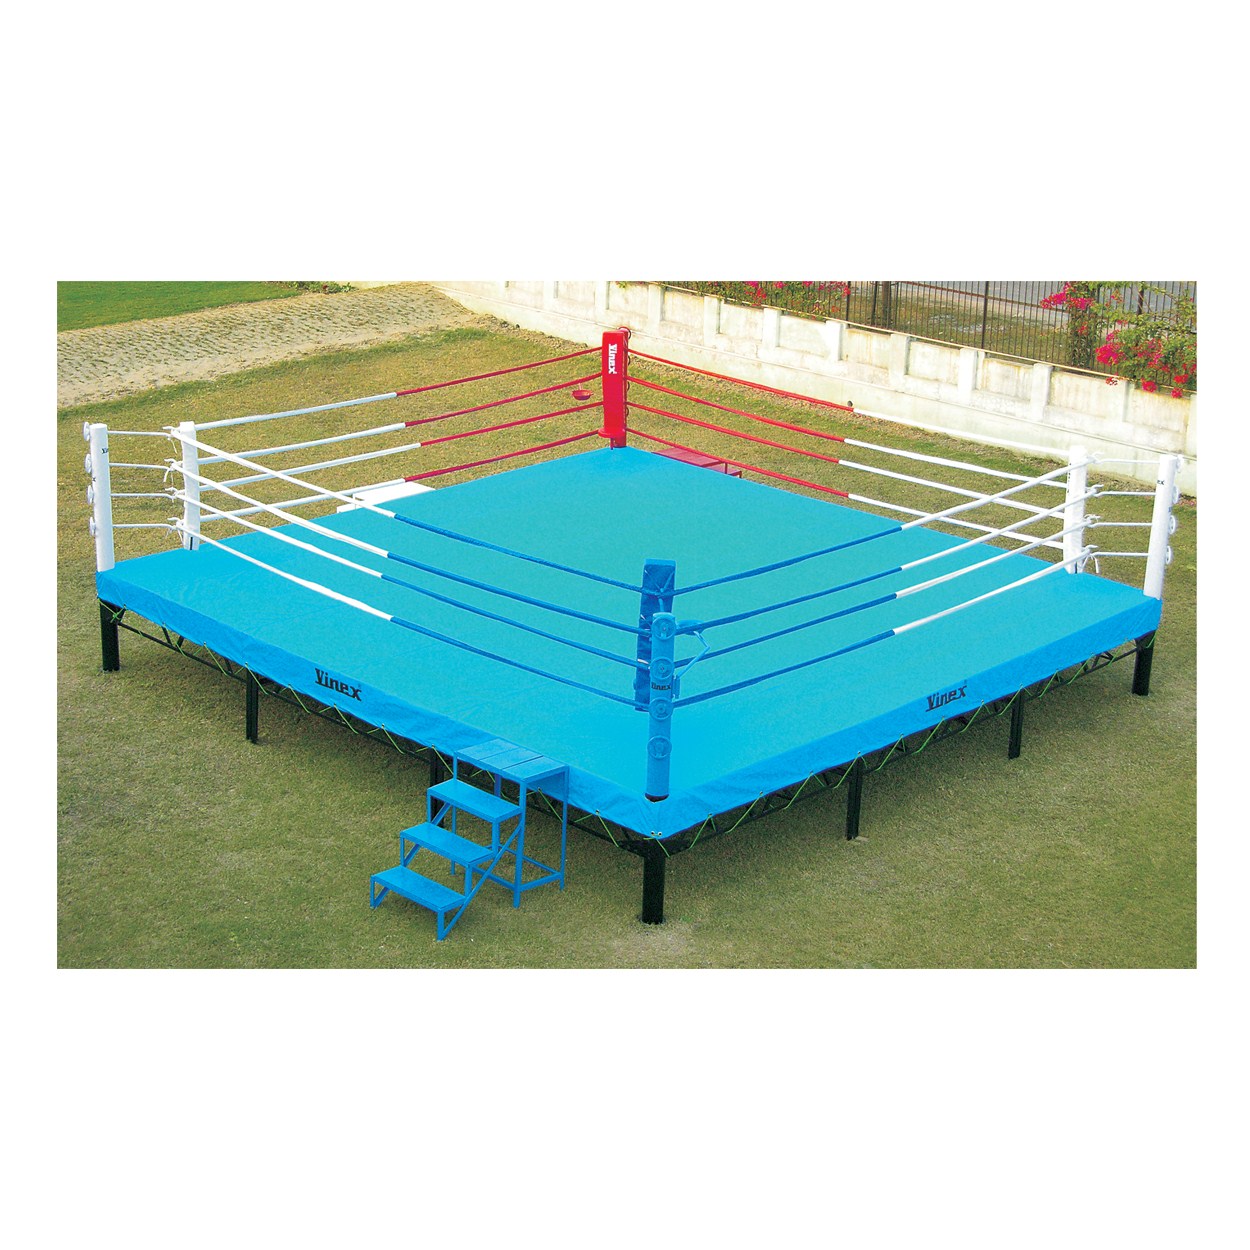 Buy Boxing Equipment Online, Manufacturers, India